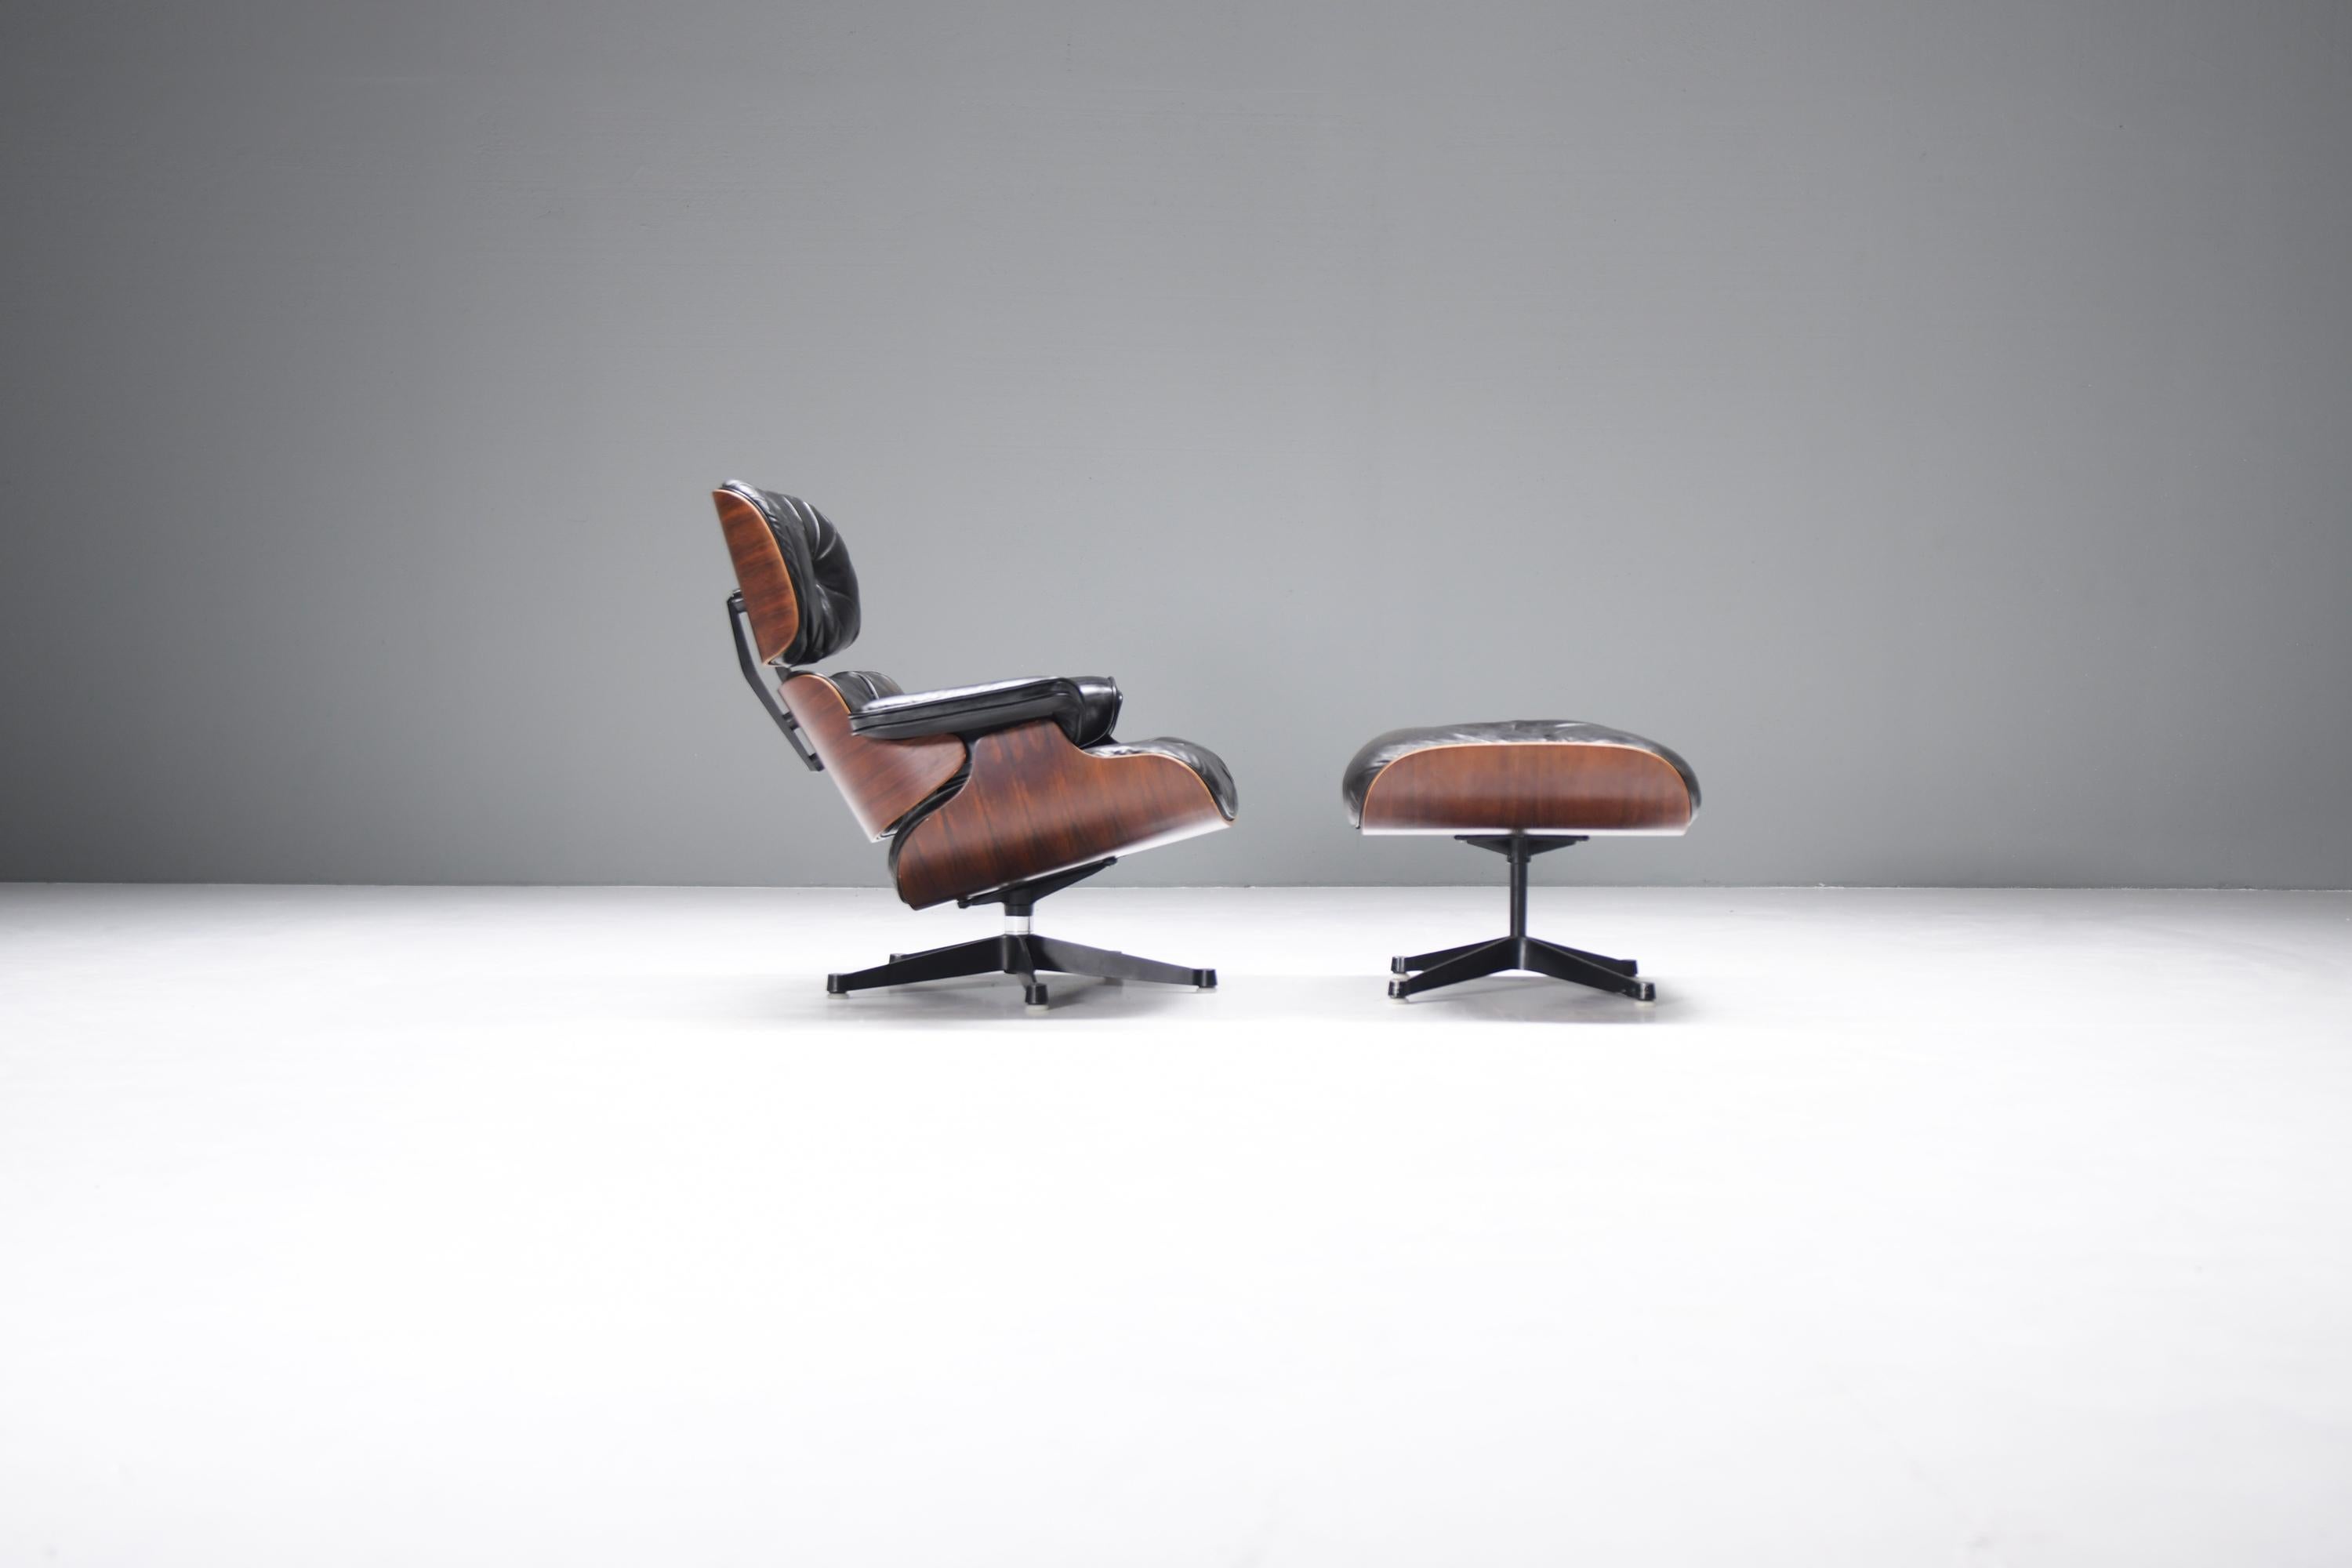 This beauty! Stunning, stylish & original early Eames lounge chair & ottoman.  Produced in 1965 by Mobilier International under licence from Herman Miller.  Collector item!
Rich patinated leather combined with the perfect shells : dark Brazilian